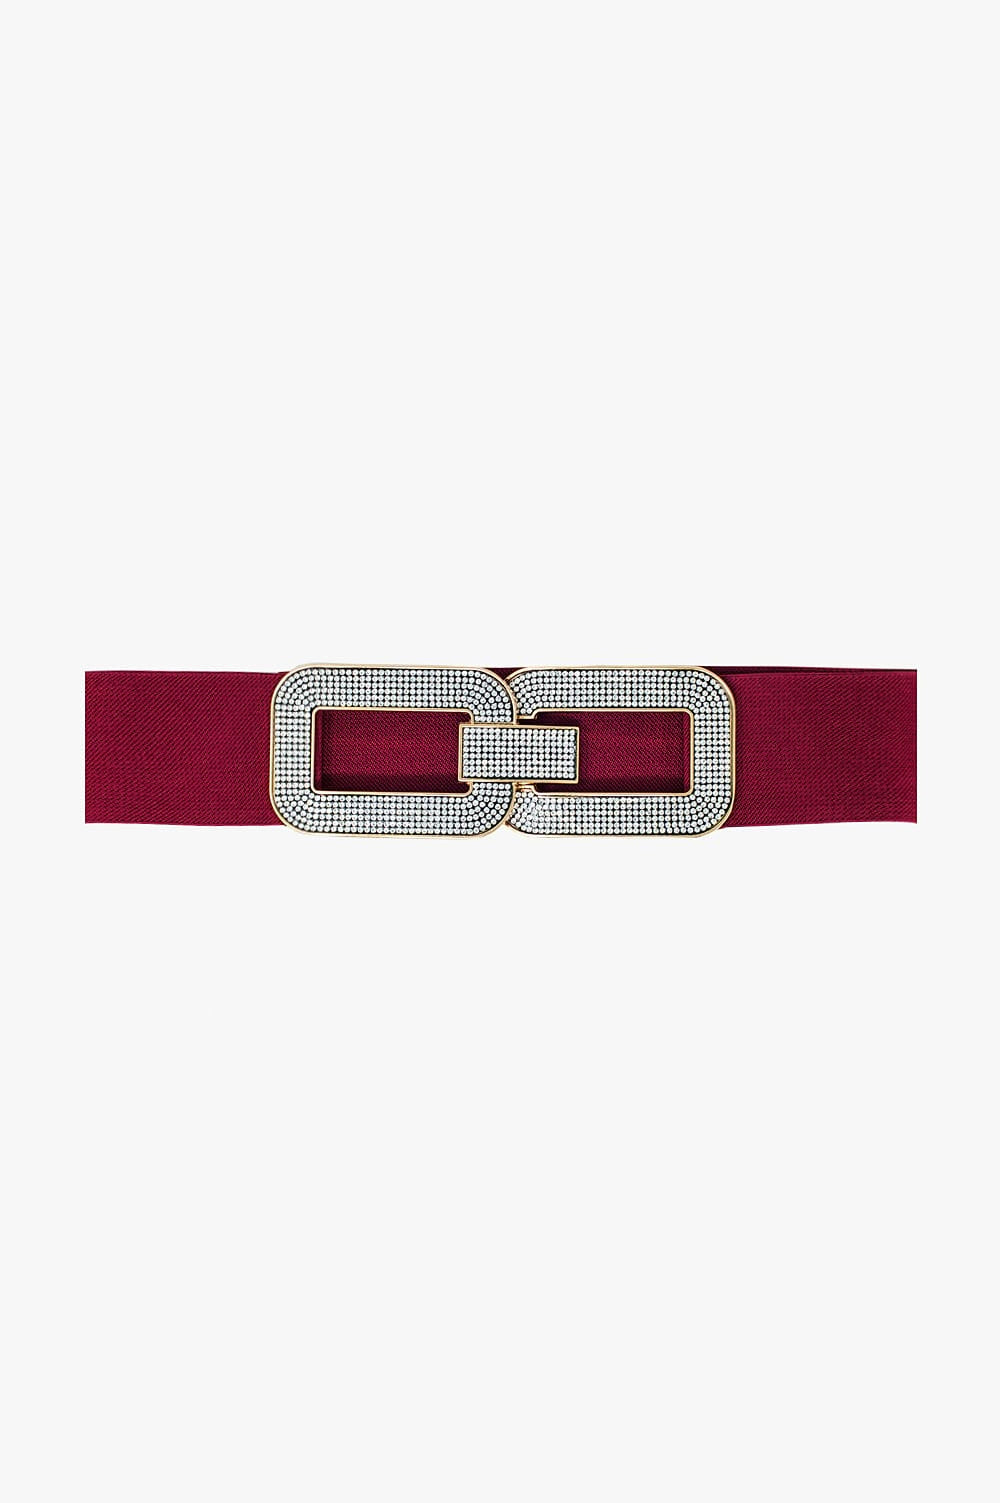 Q2 Red elastic belt with double oval buckle with rhinestone inlays